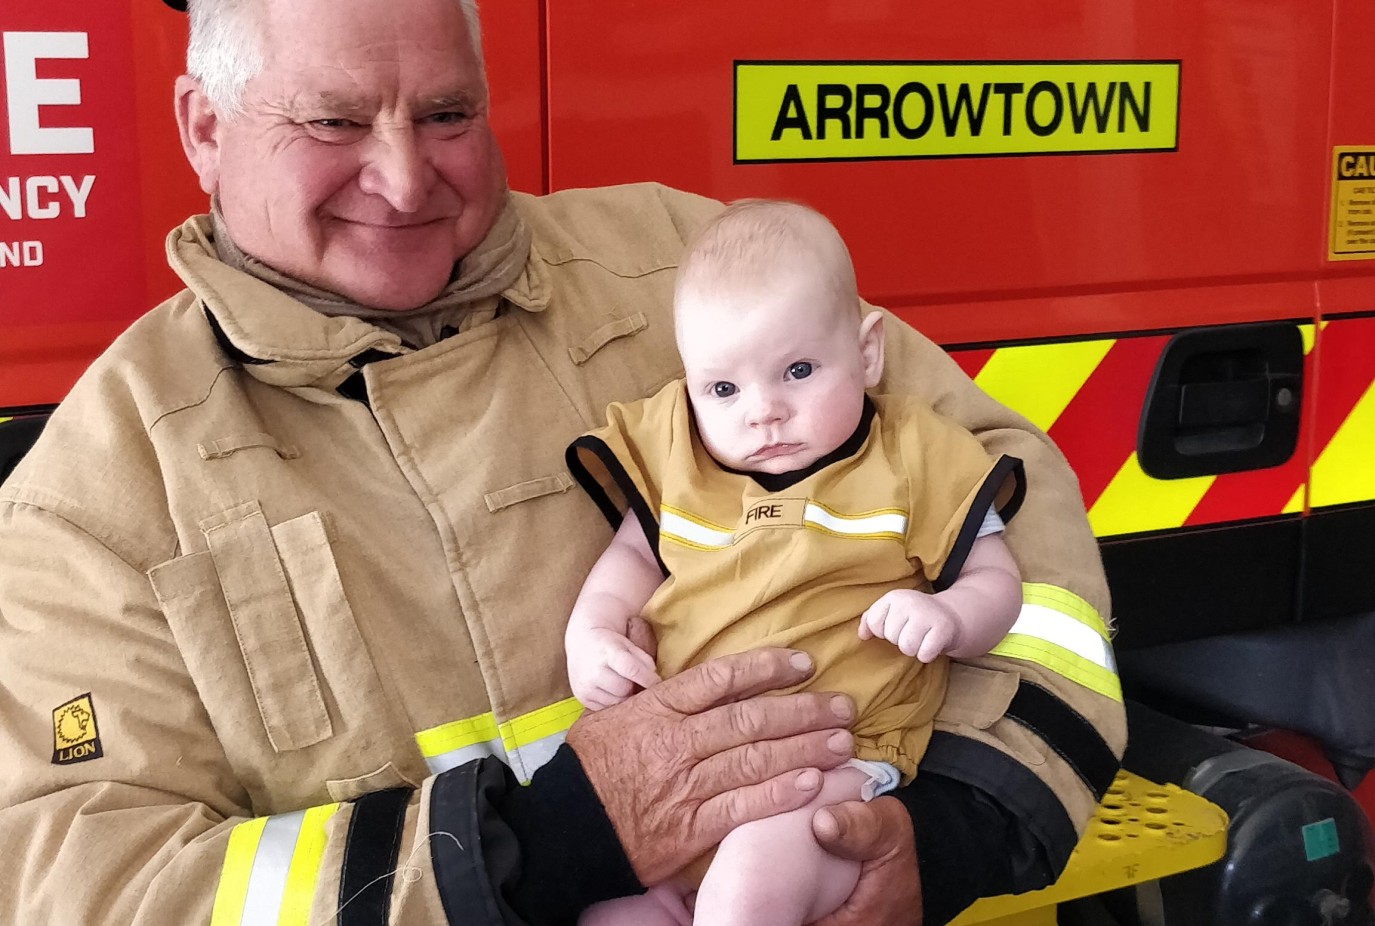 Garry and wannabe fireman grandson Cooper Rushton in matching outfits